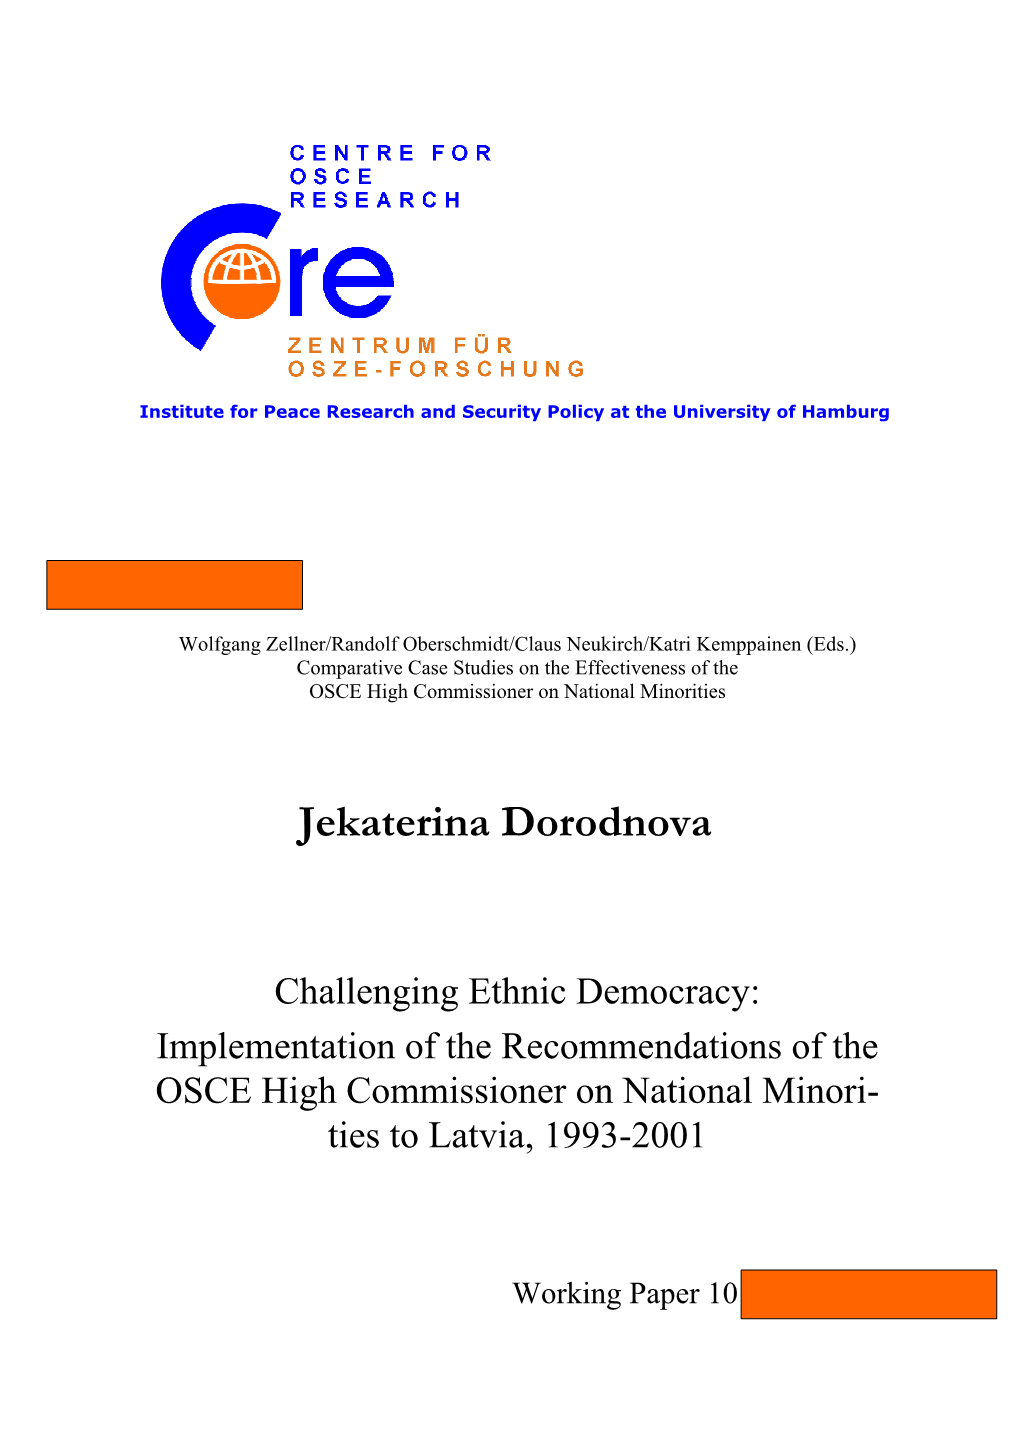 Challenging Ethnic Democracy: Implementation of the Recommendations of the OSCE High Commissioner on National Minori- Ties to Latvia, 1993-2001